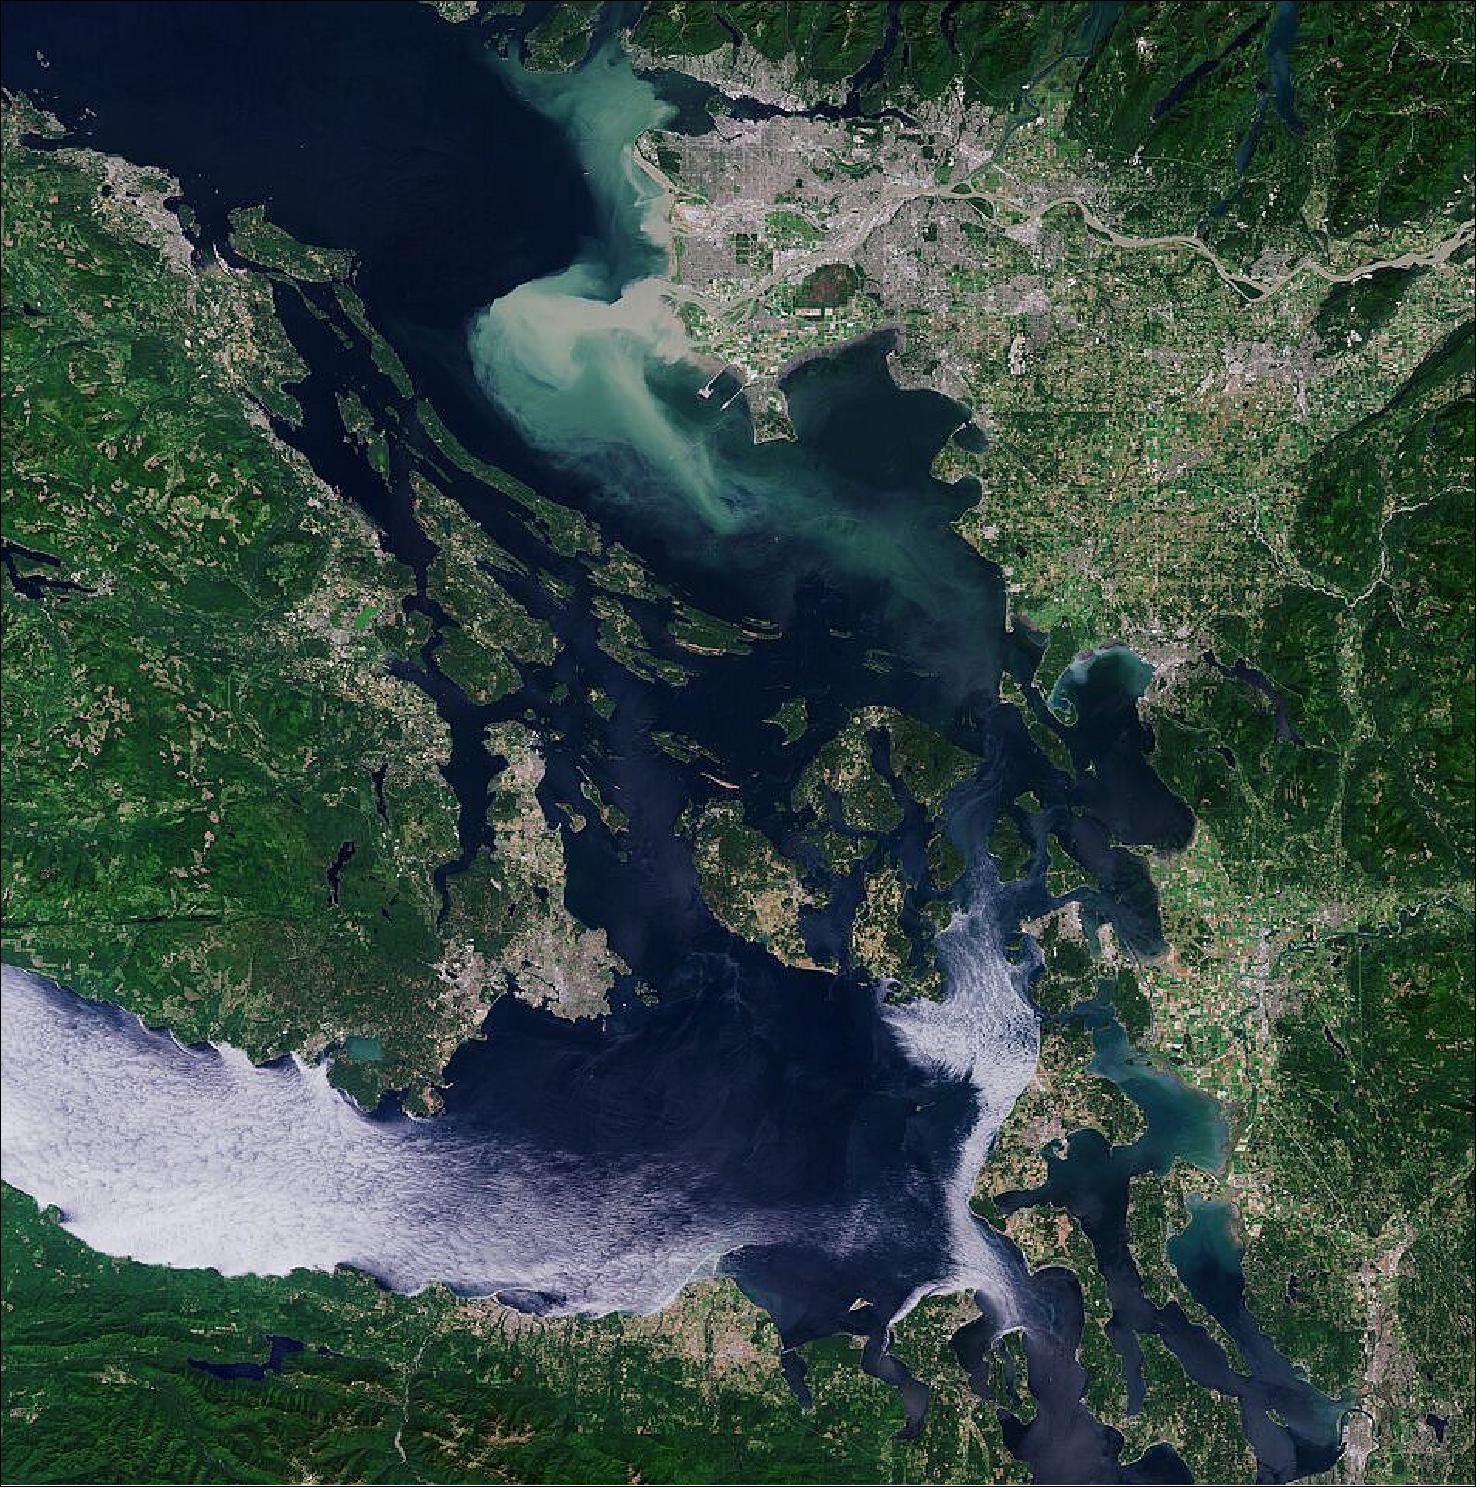 Figure 69: Vancouver, visible at the top of the image, lies between the Burrard Inlet, an arm of the Strait of Georgia, to the north, and the Fraser River delta to the south. Vancouver has the highest population density in Canada, with over 5400 people/km2, making it the fifth-most densely populated city in North America. This image is also featured on the Earth from Space video program (image credit: ESA, the image contains modified Copernicus Sentinel data (2019), processed by ESA, CC BY-SA 3.0 IGO)